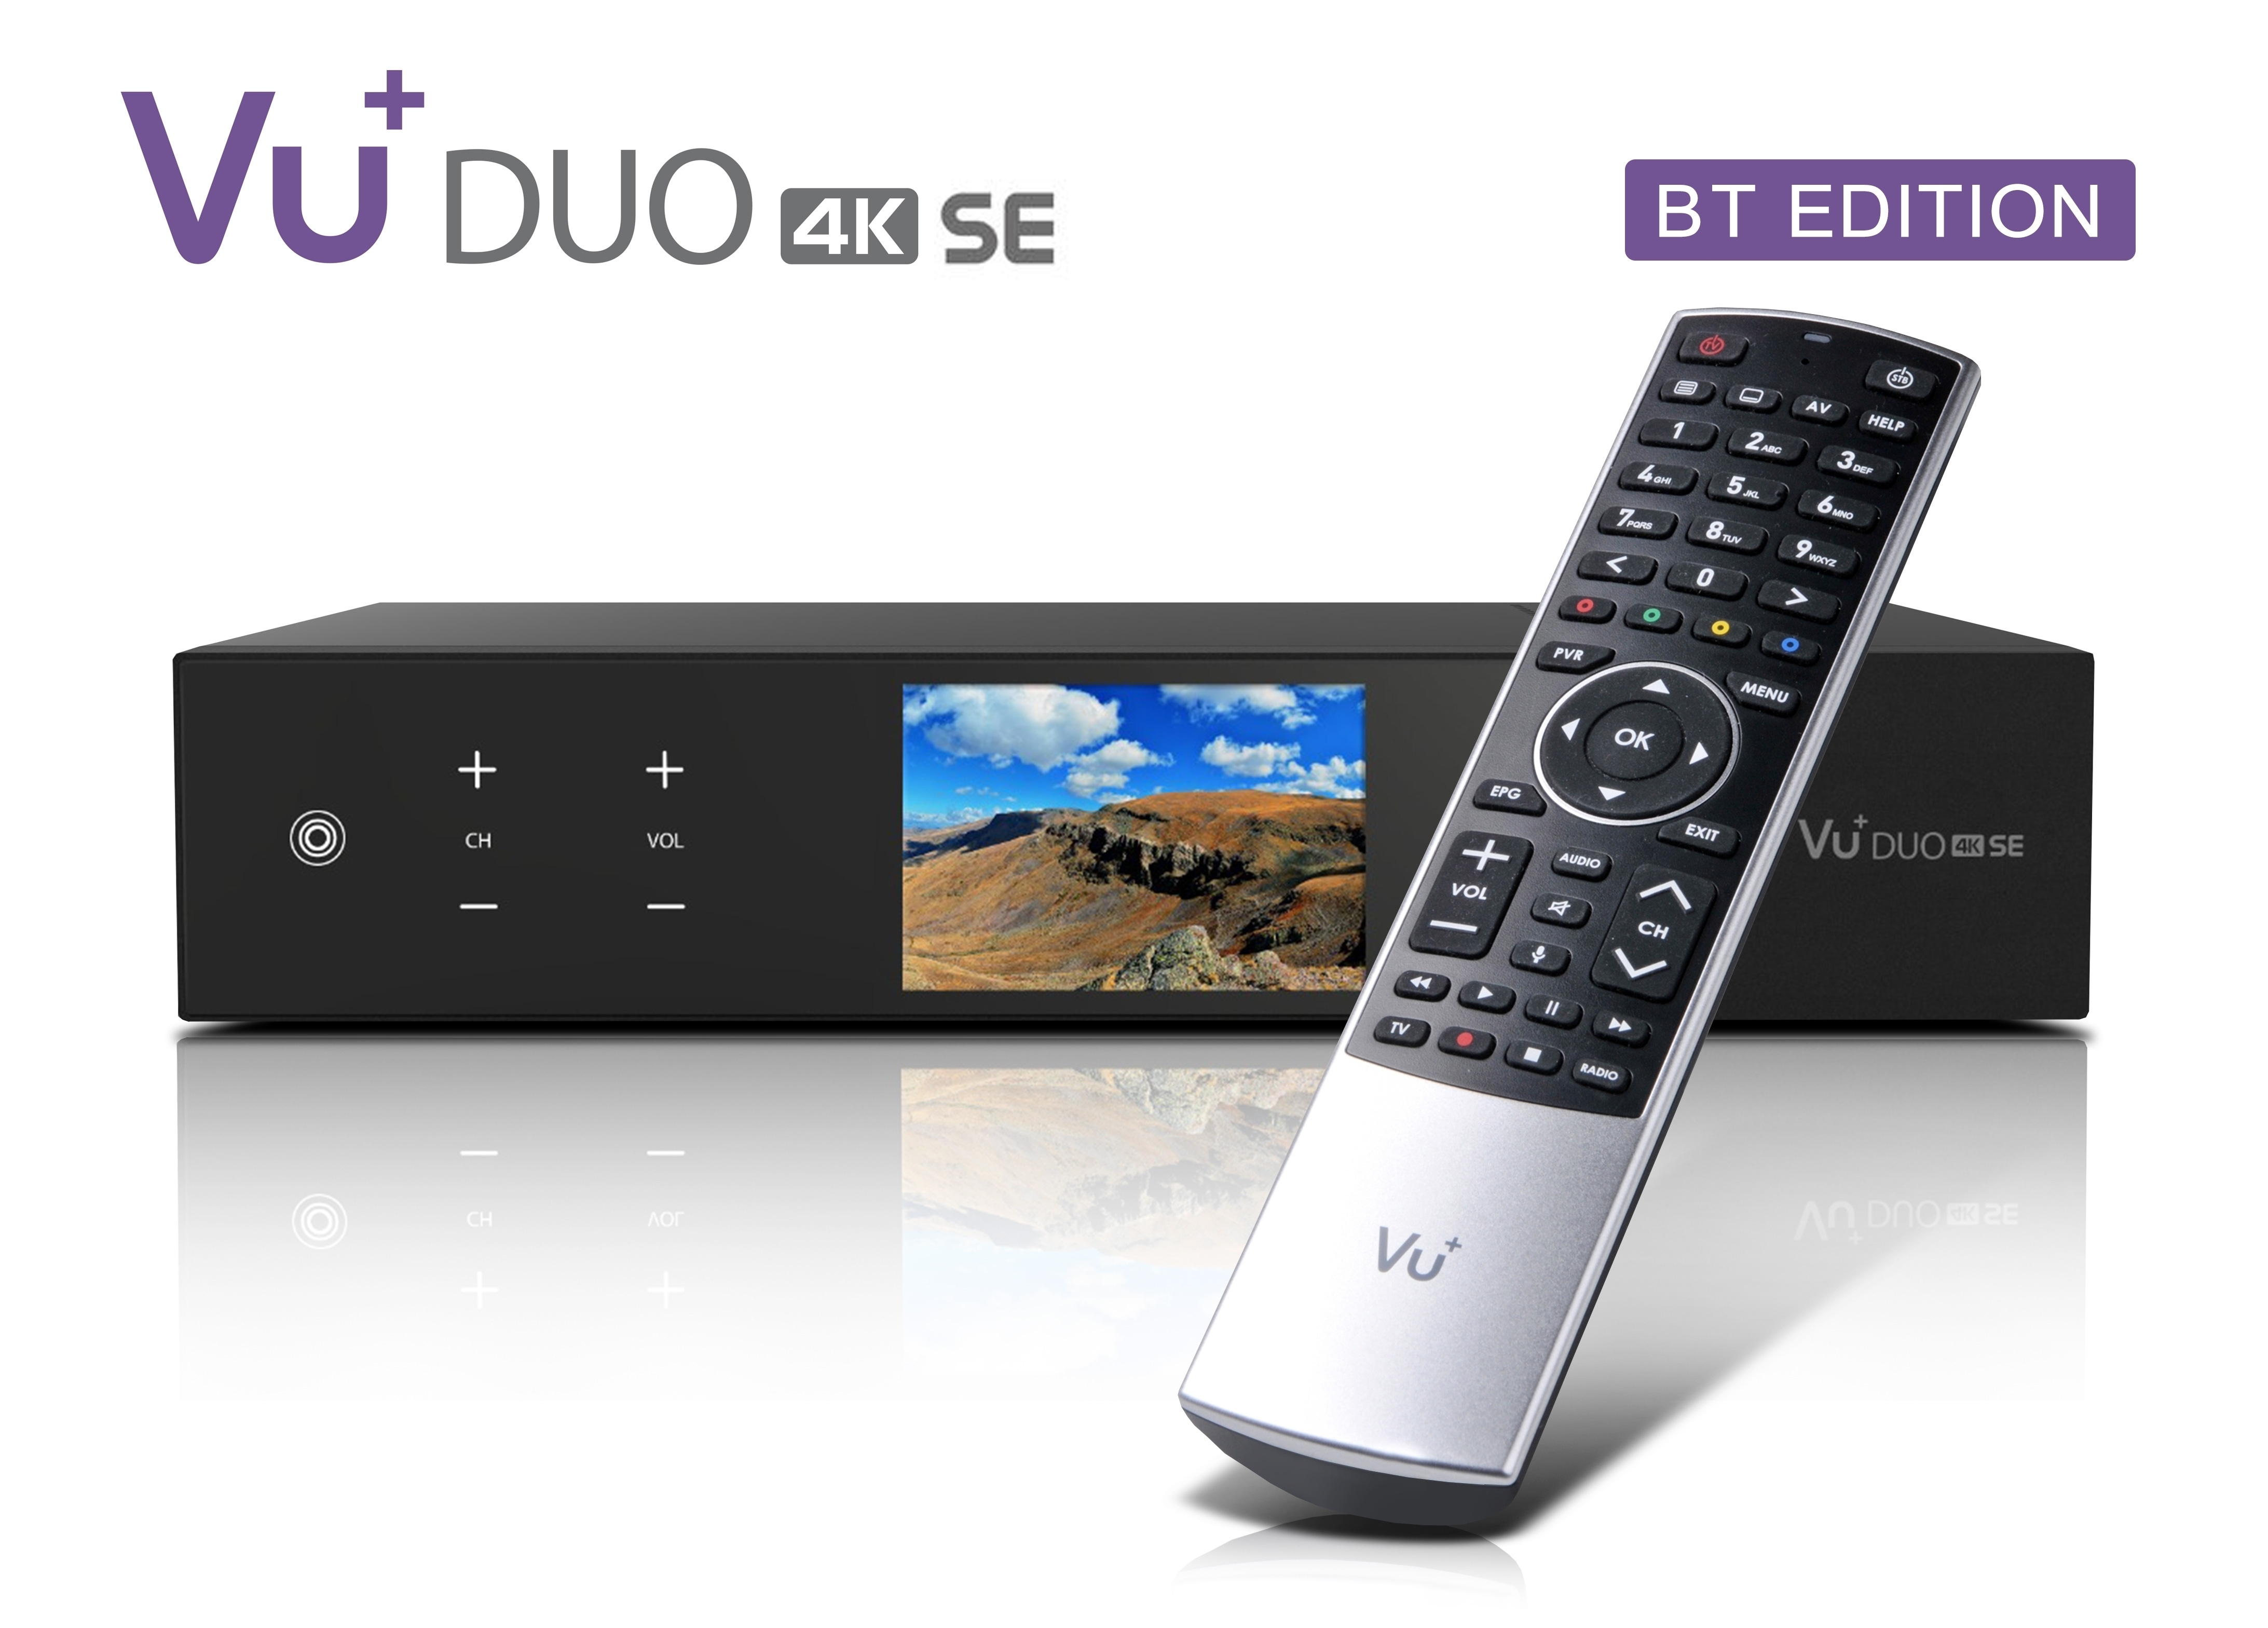 VU+ Duo 4K SE BT 1x DVB-S2X FBC Twin / 1x DVB-C FBC Tuner PVR ready Linux Receiver UHD 2160p